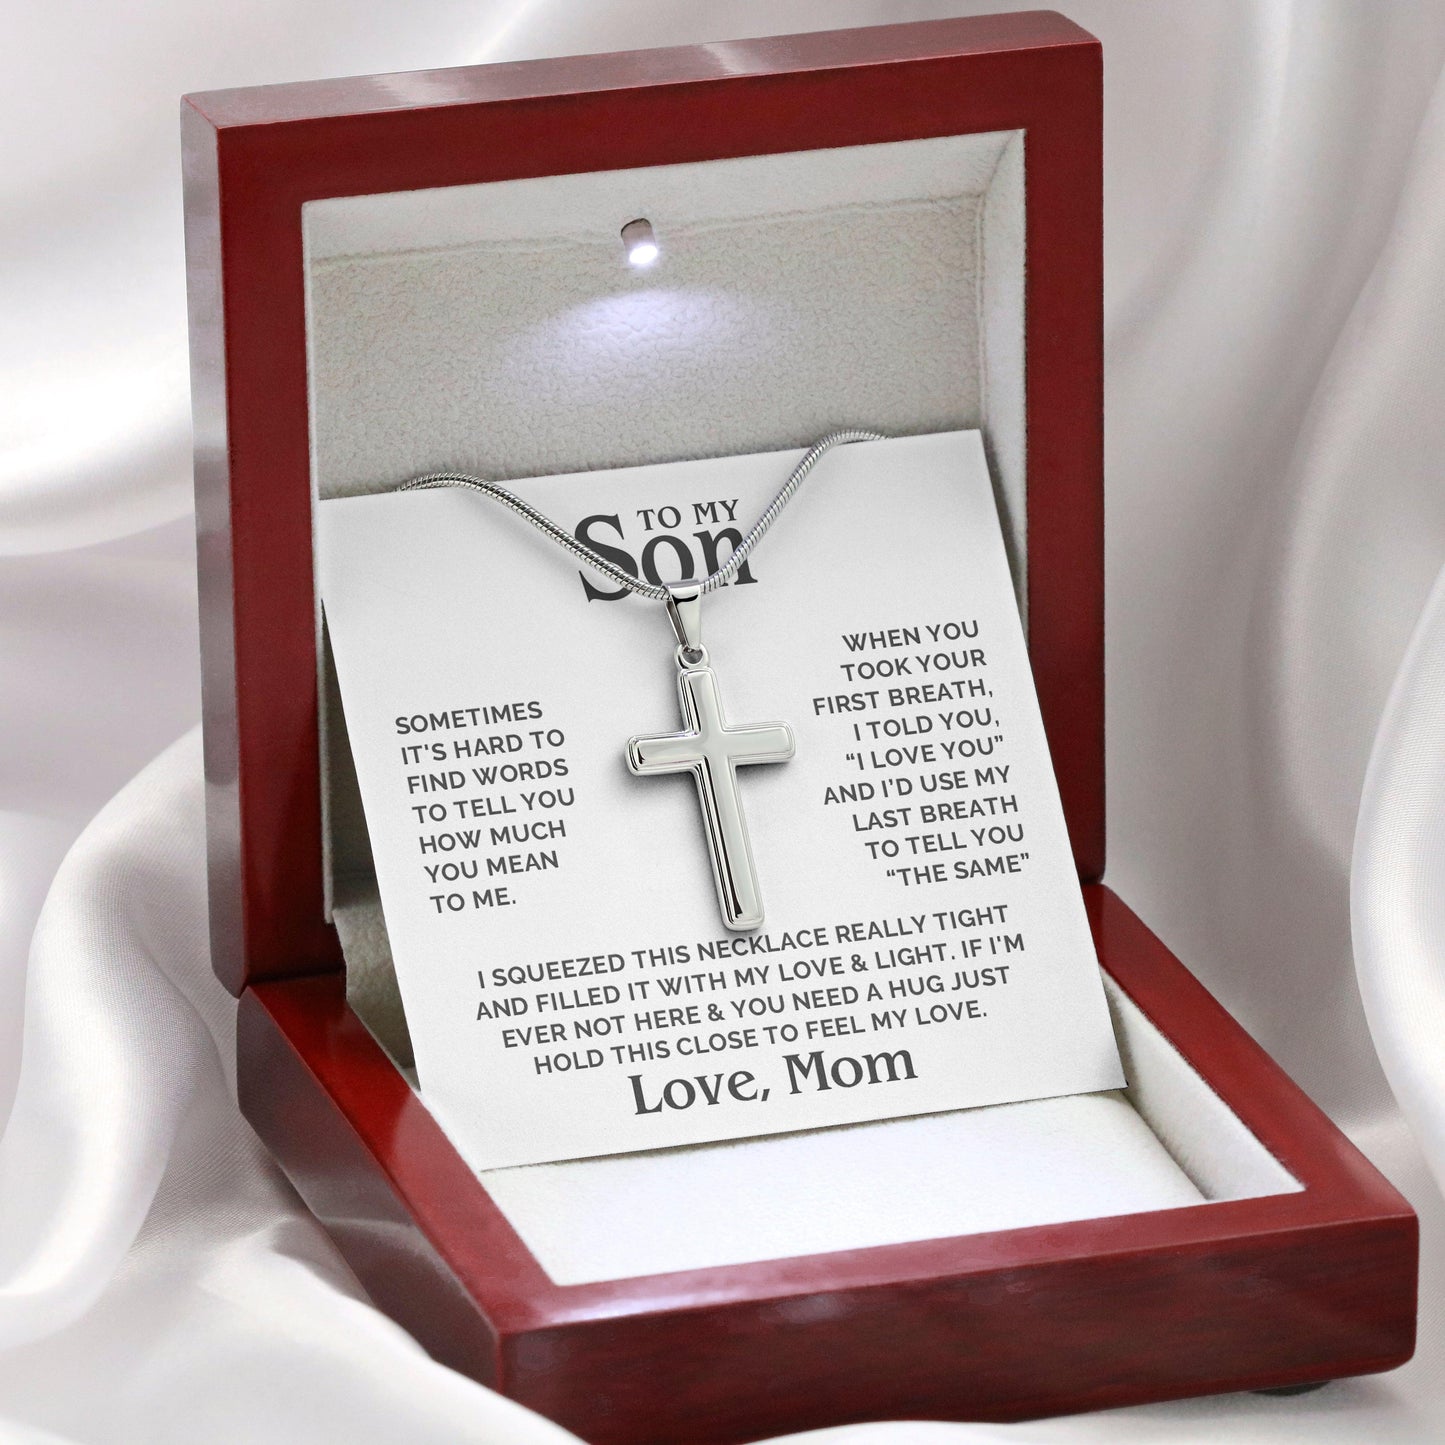 Jewelry gifts Son - Feel My Love - Cross Gift Necklase - Belesmé - Memorable Jewelry Gifts